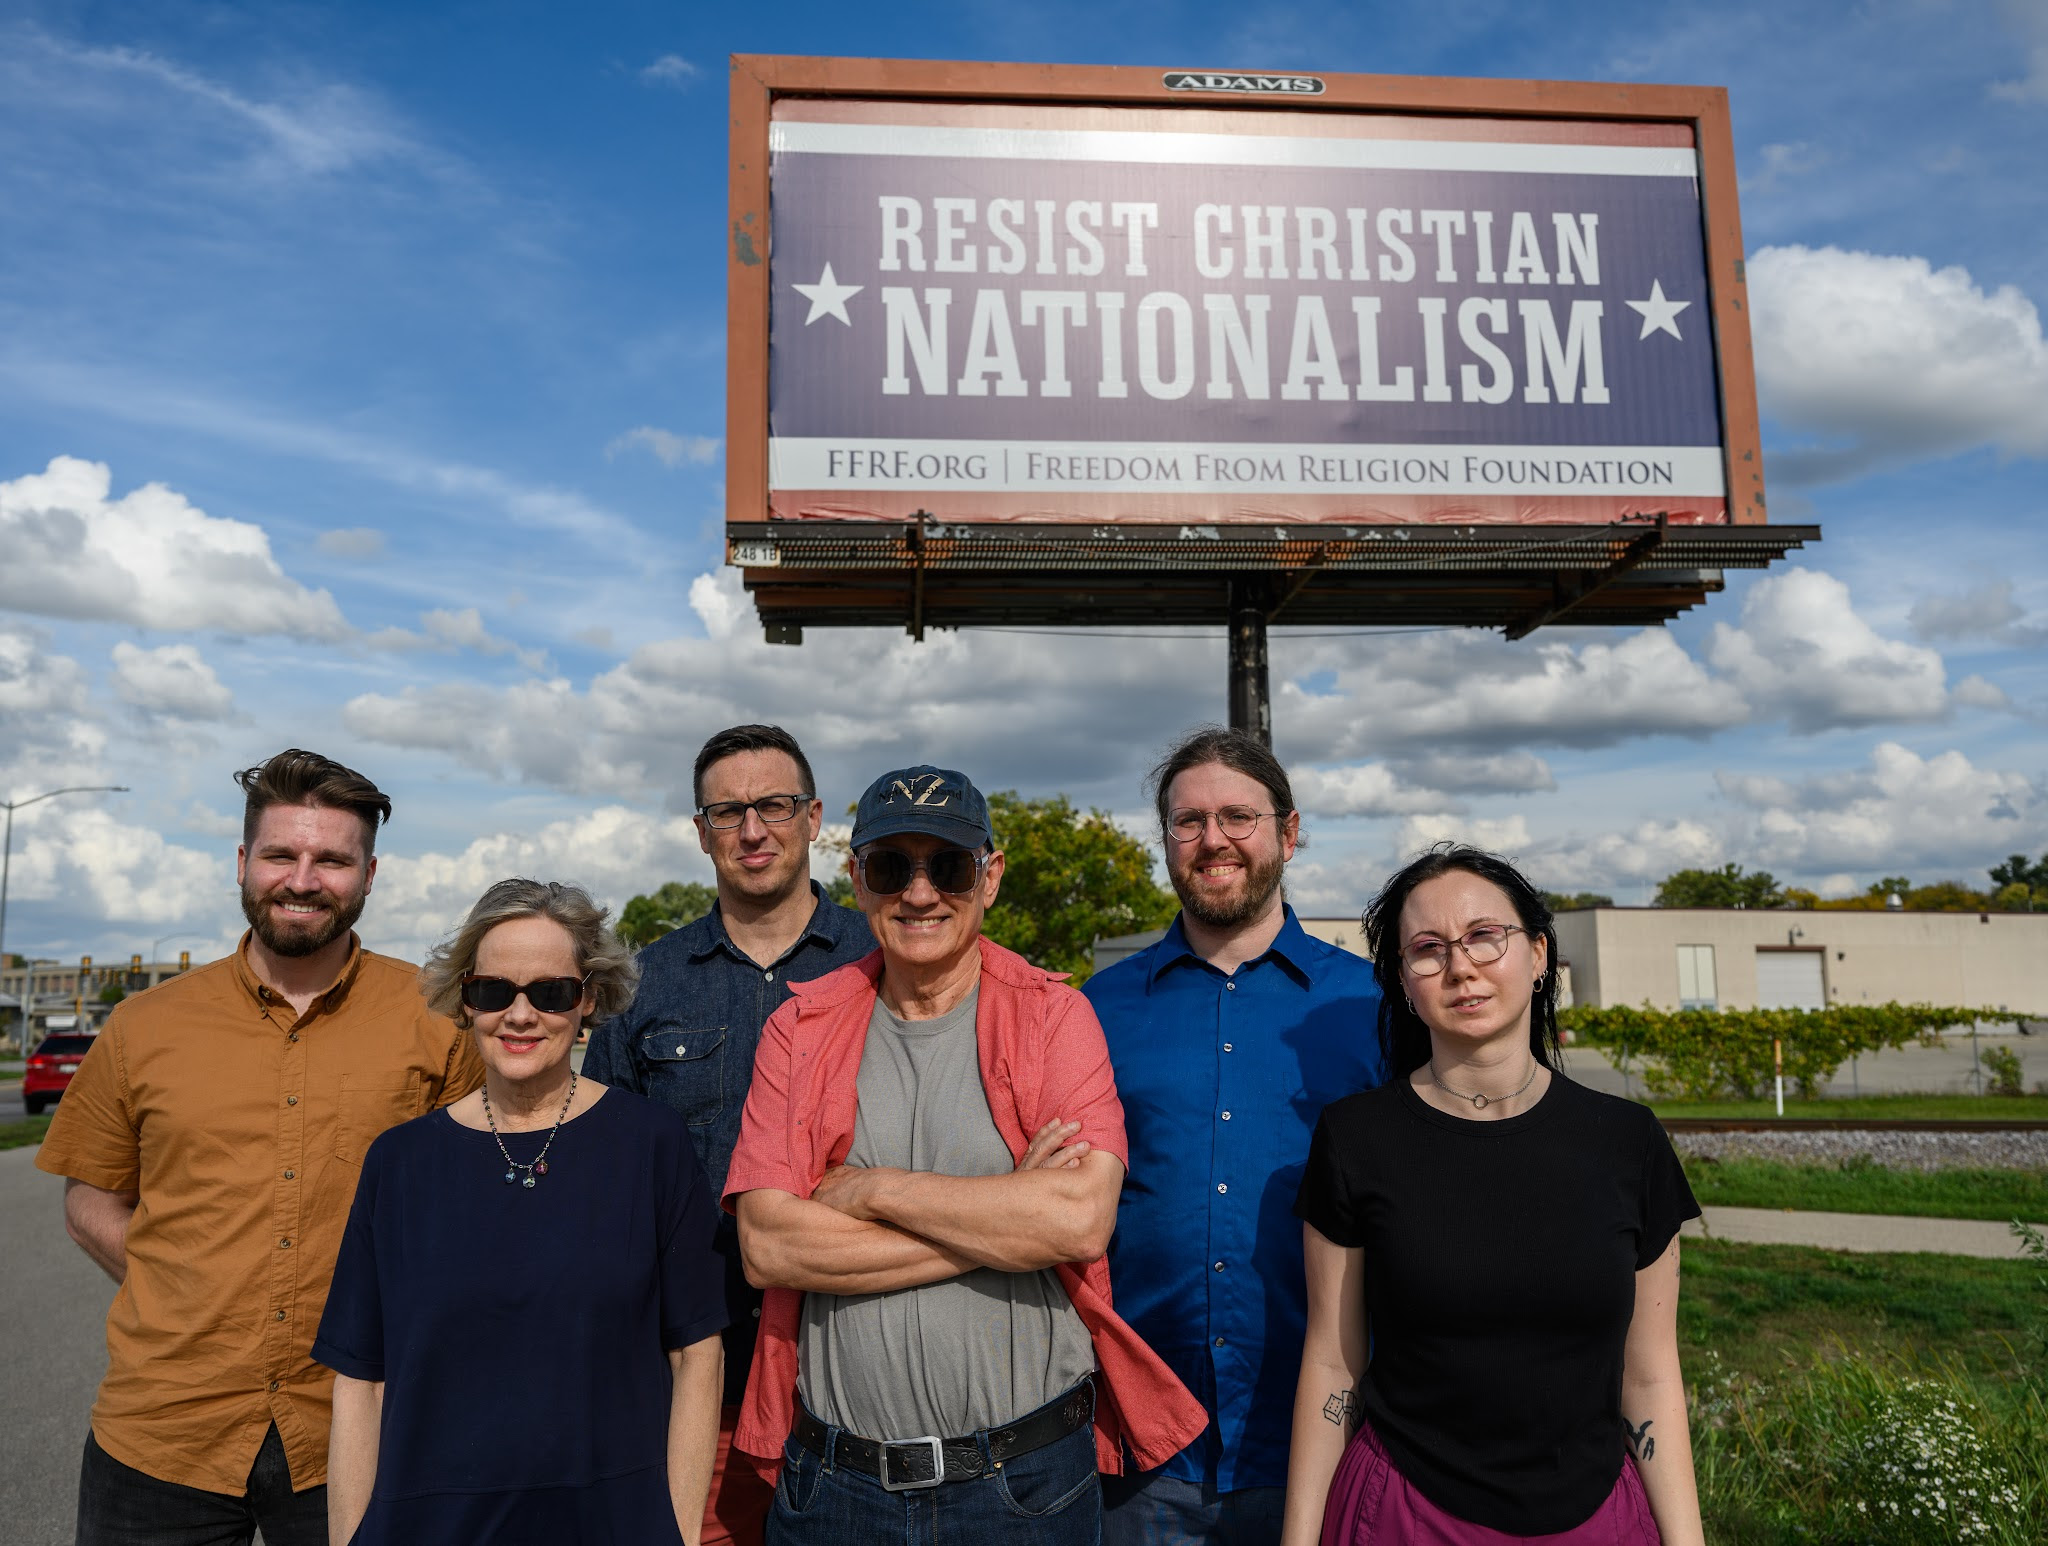 FFRF staff members standing in front of billboard that says "Resist Christian Nationalism"